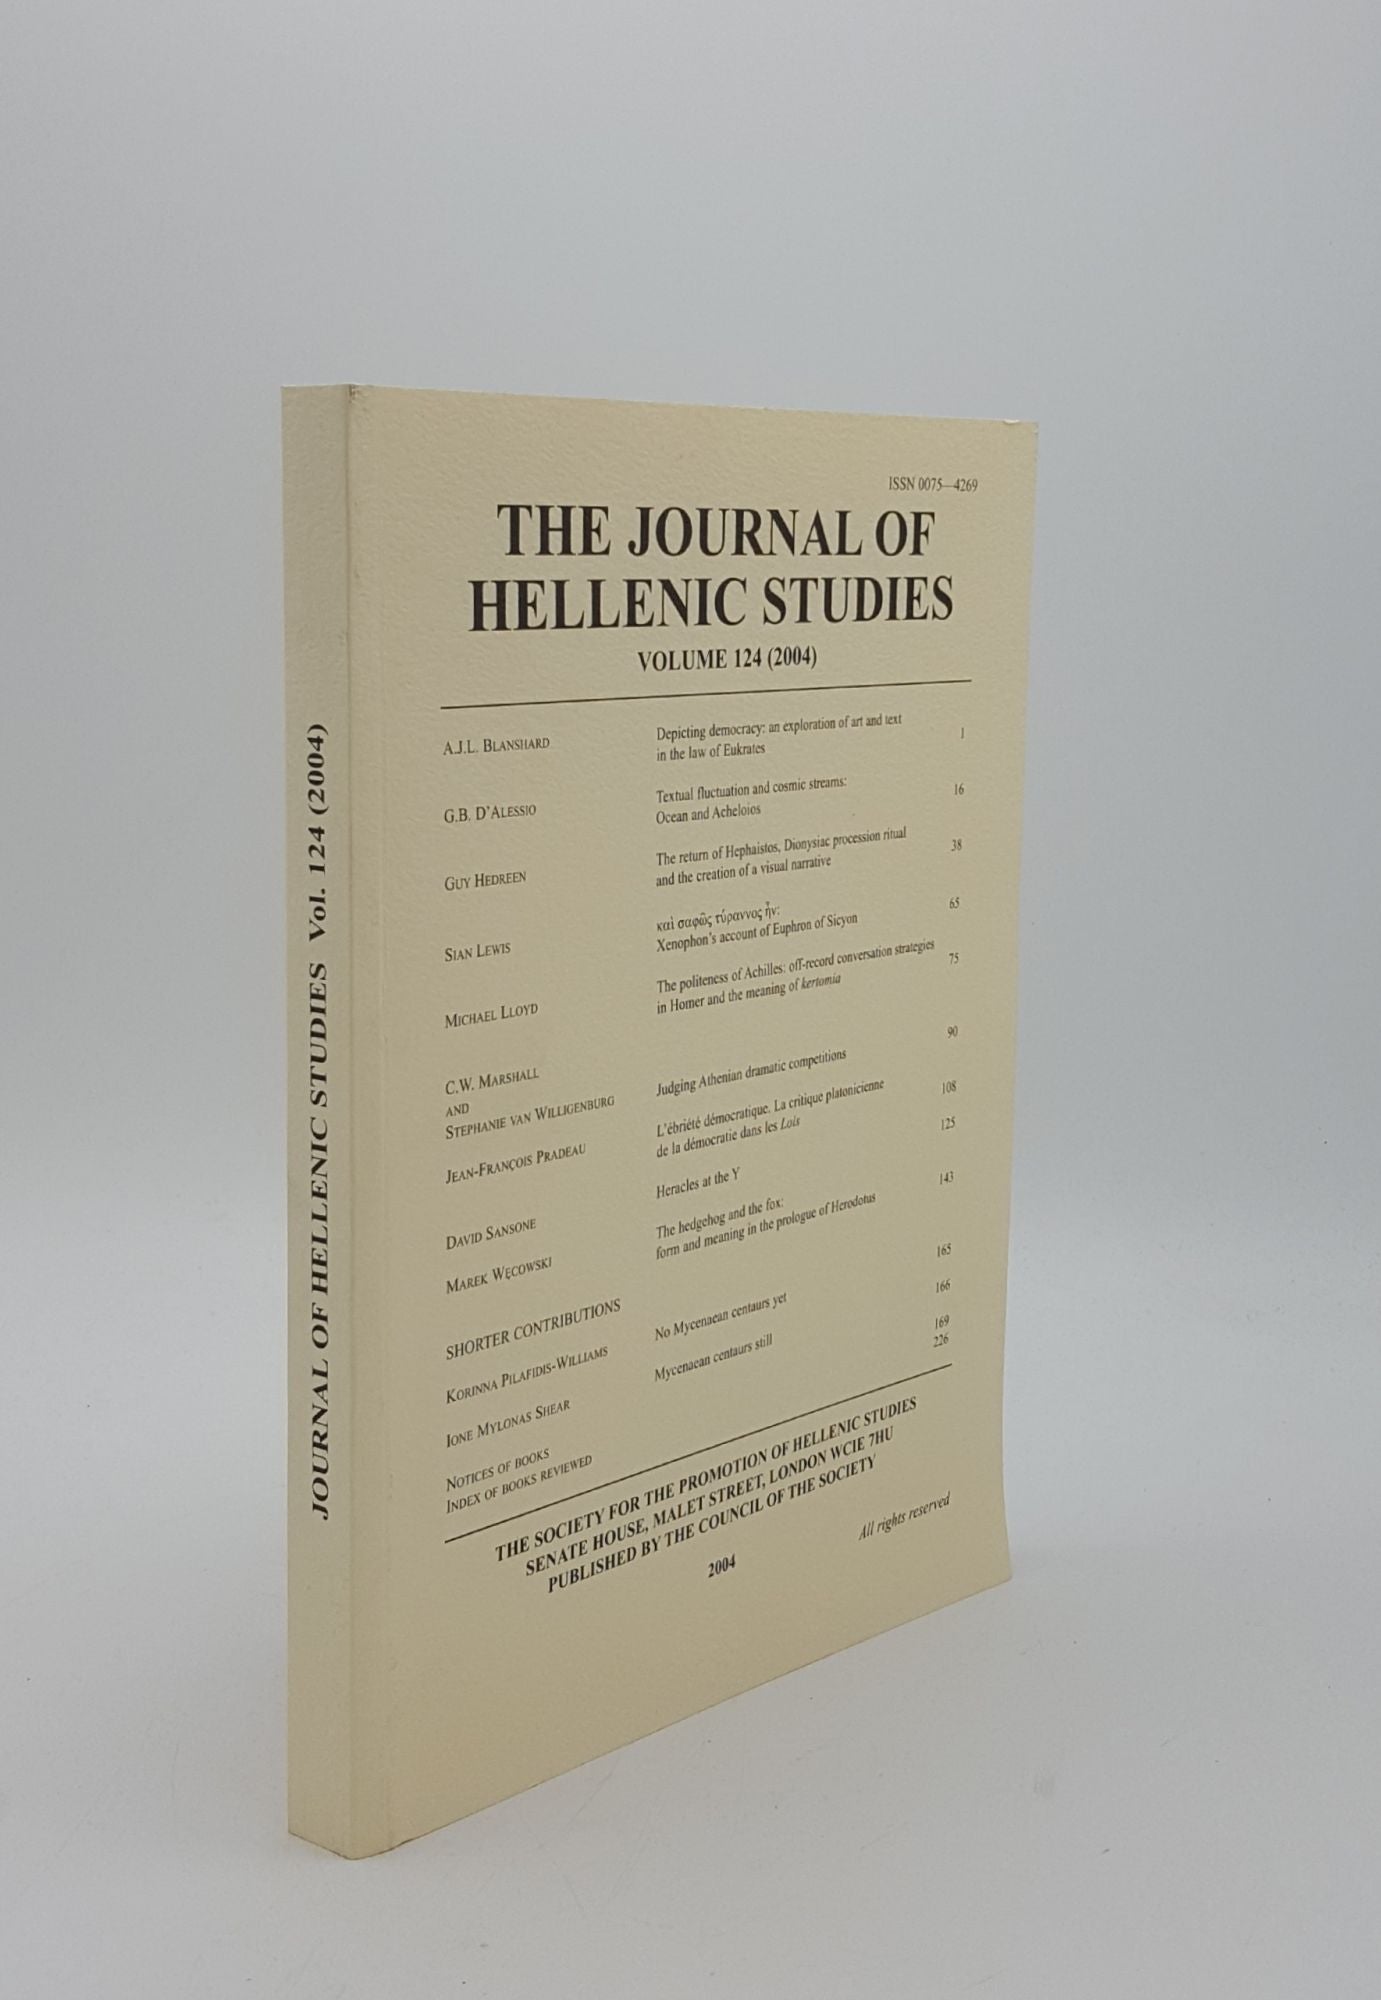 Council of the Society for the Promotion of Hellenic Studies - The Journal of Hellenic Studies Volume 124 2004